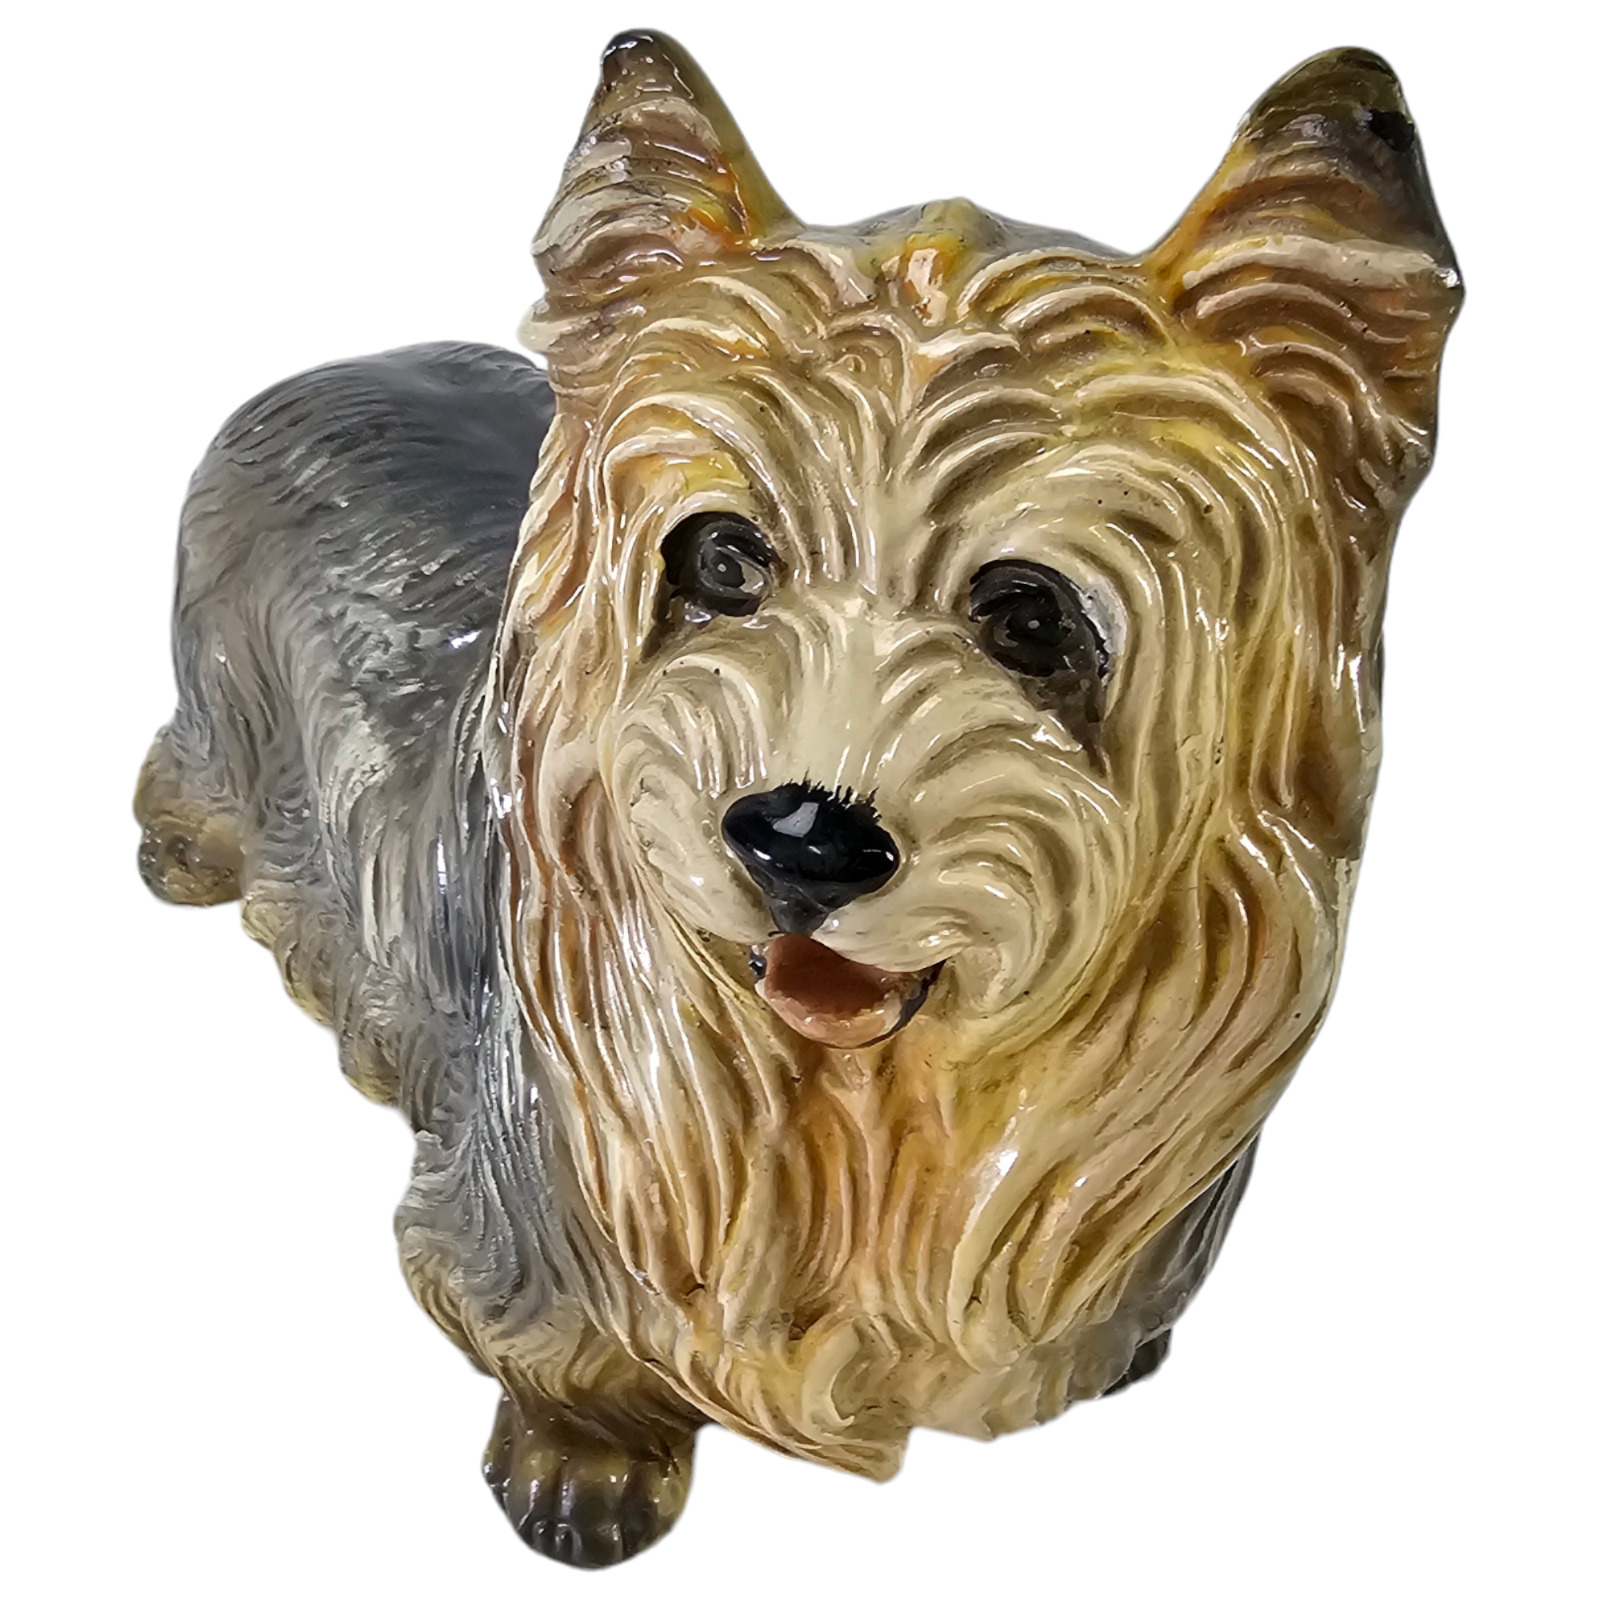 Antique Fabulous Clay Yorkshire Terrier Dog Gray Figurine Statue English Orig.